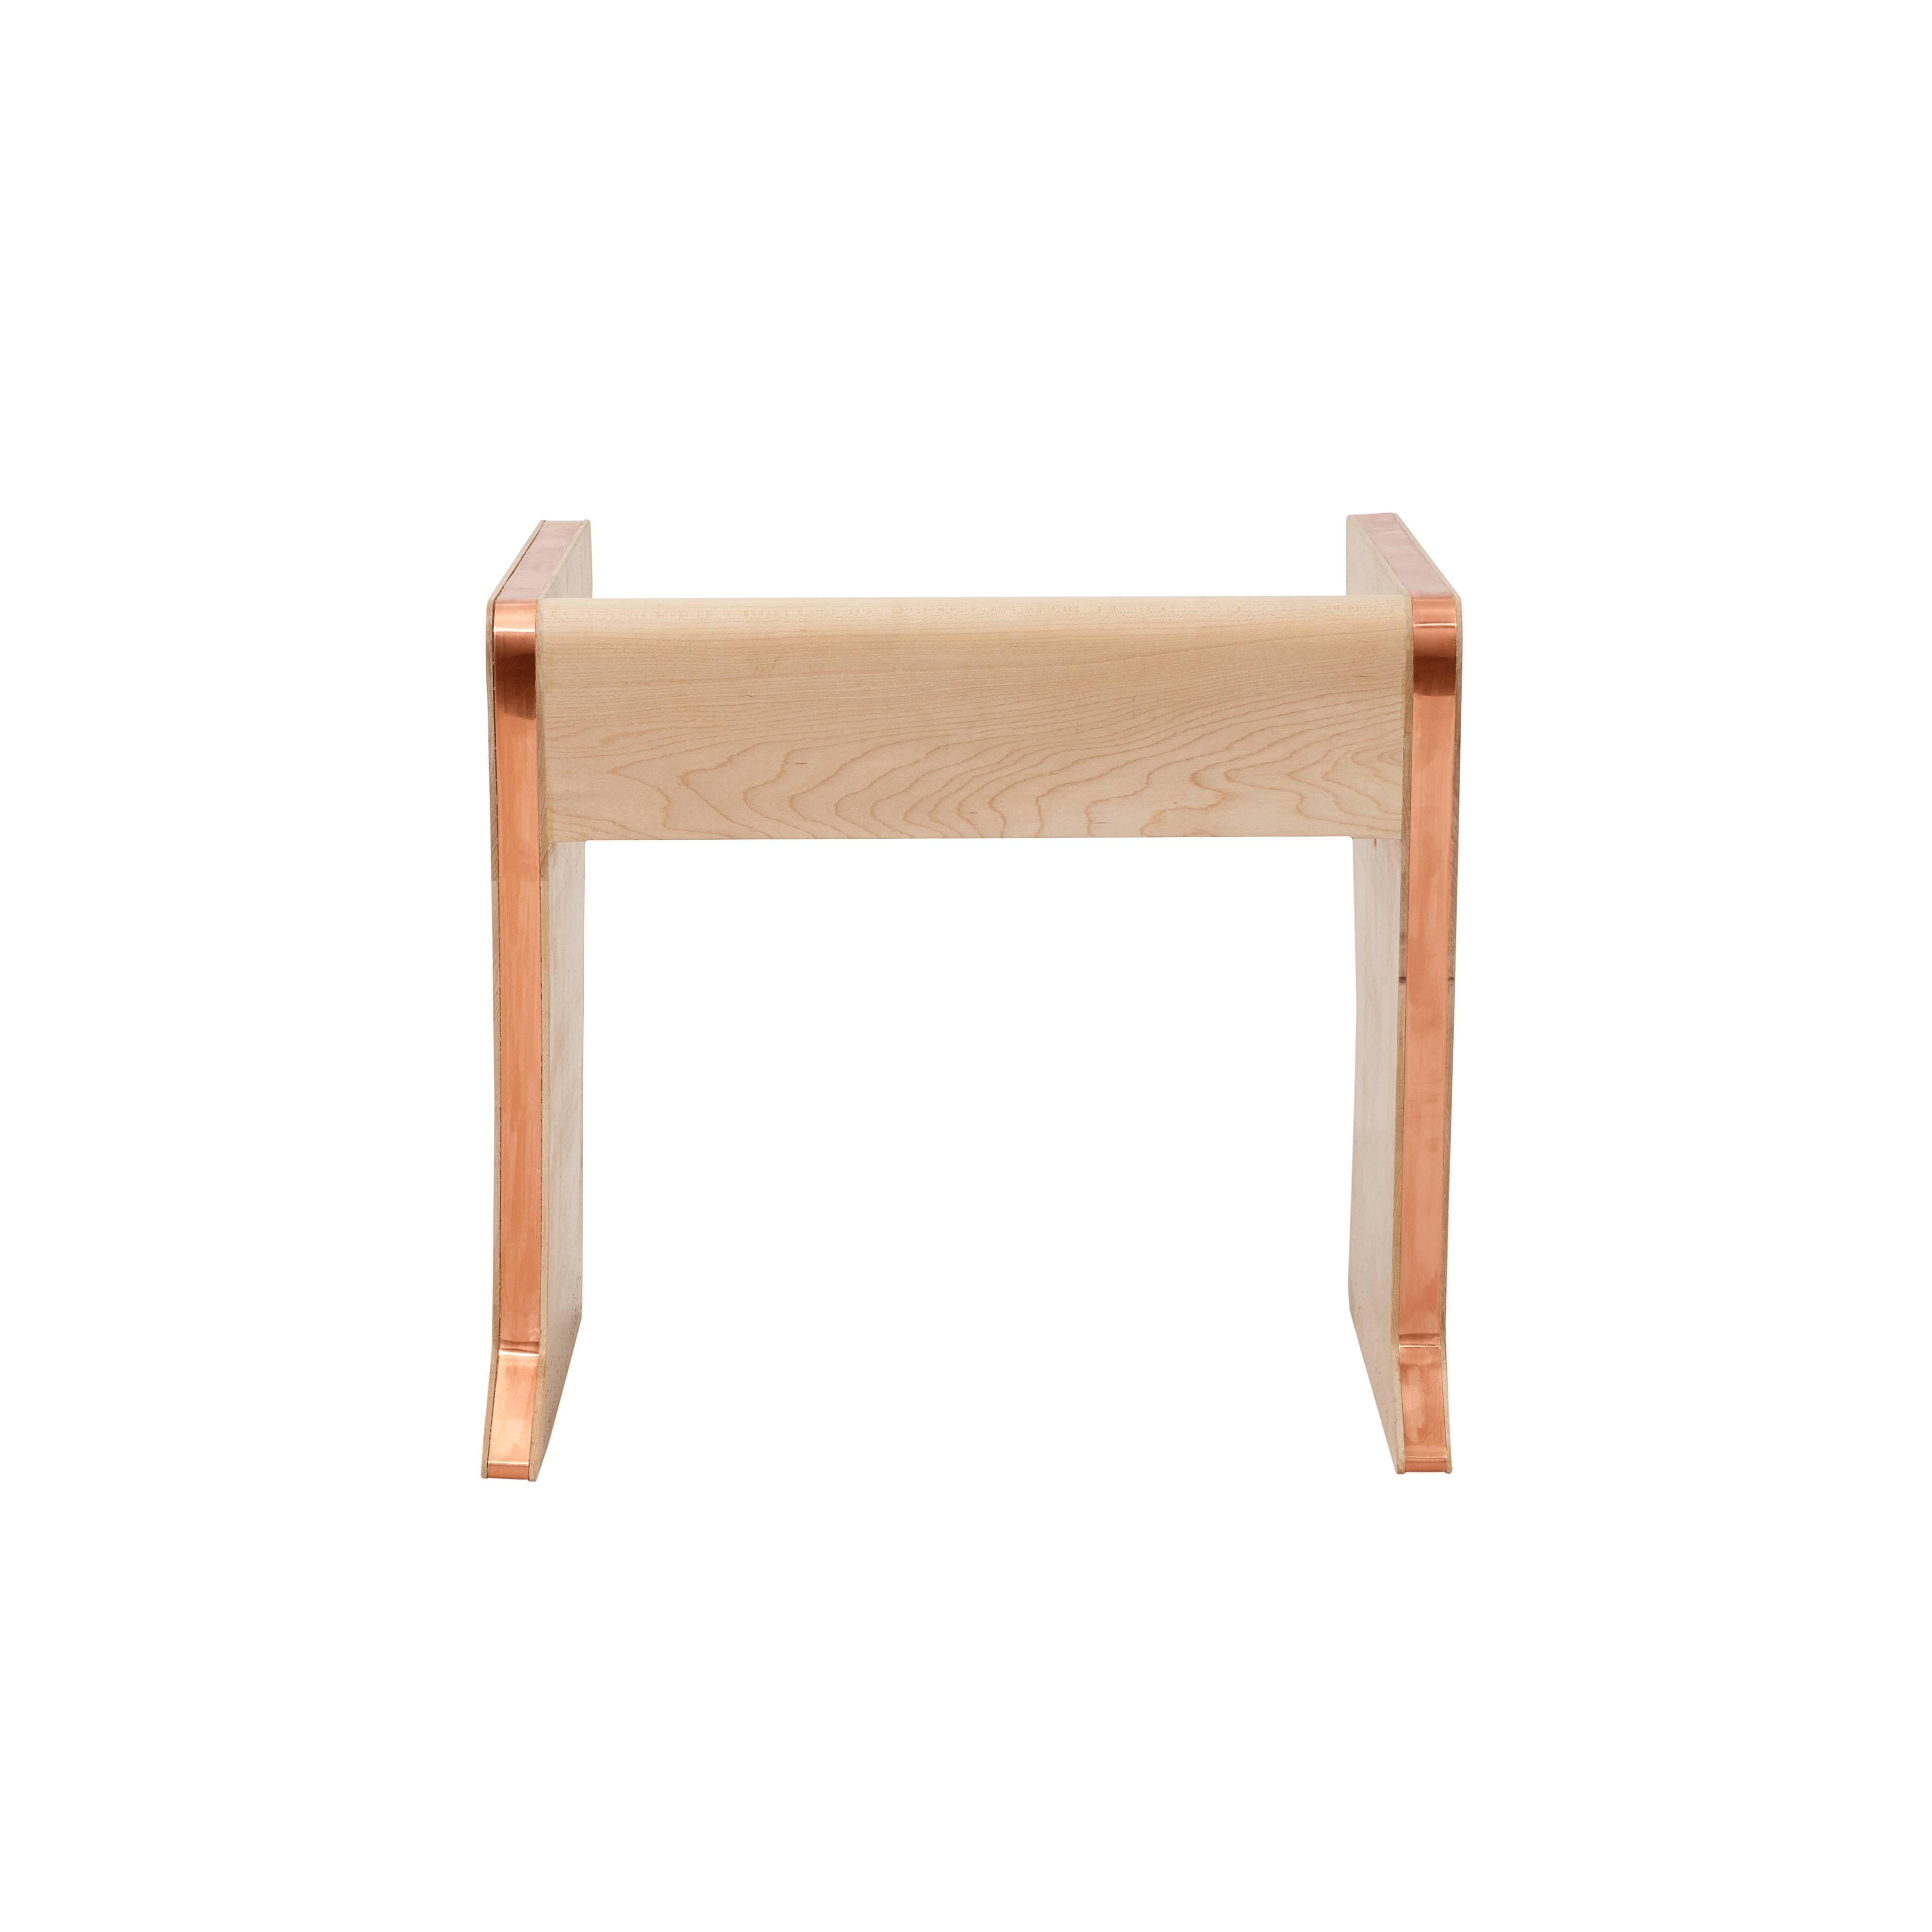 'Sit' Child Chair from the Heritage Collection by Studiokinder in Maple/Copper In Excellent Condition For Sale In New York, NY